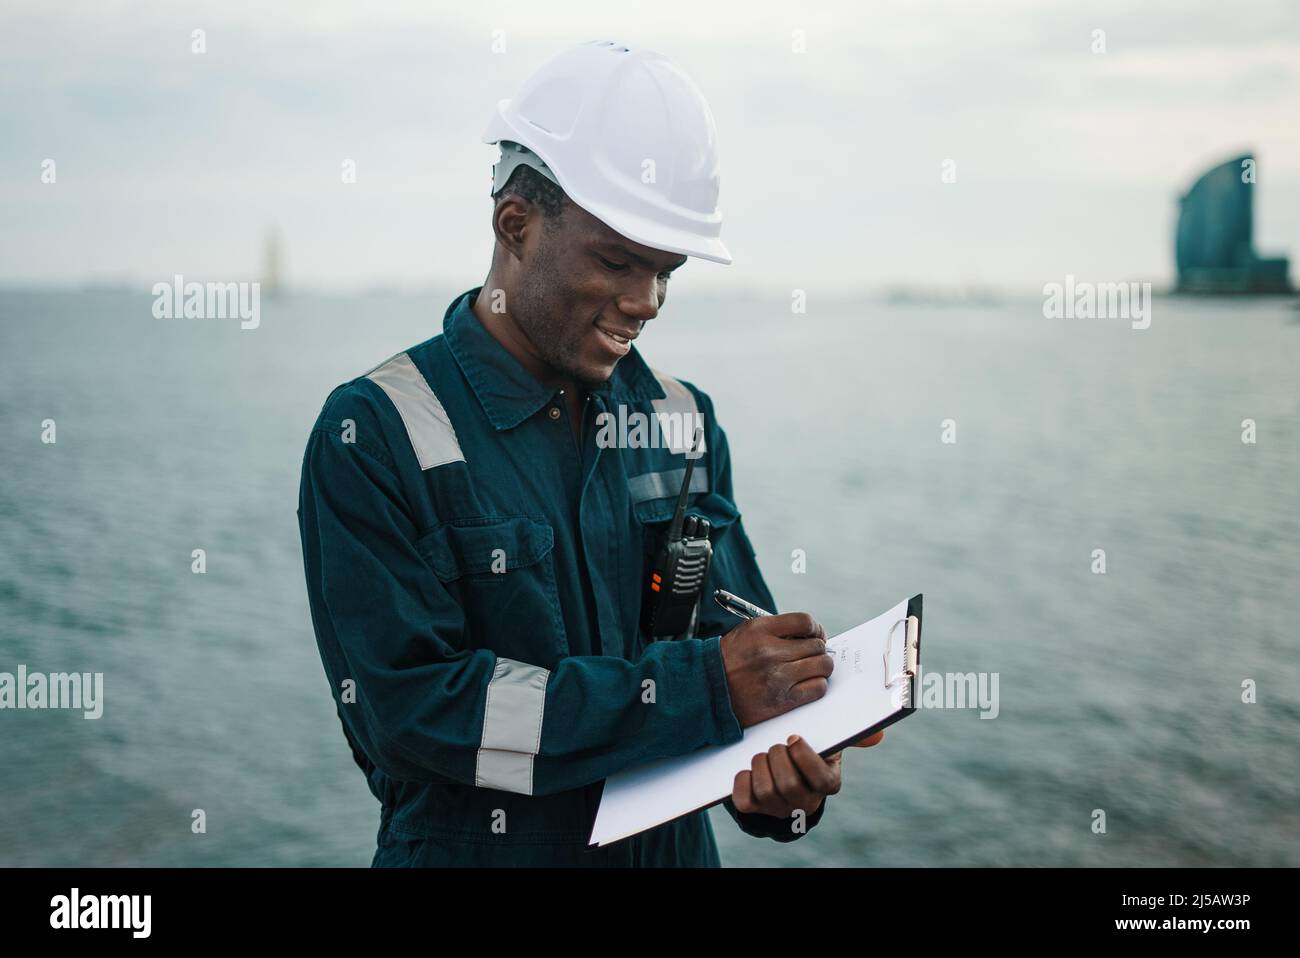 Marine navigational officer or chief mate on navigation watch on ship or vessel Stock Photo